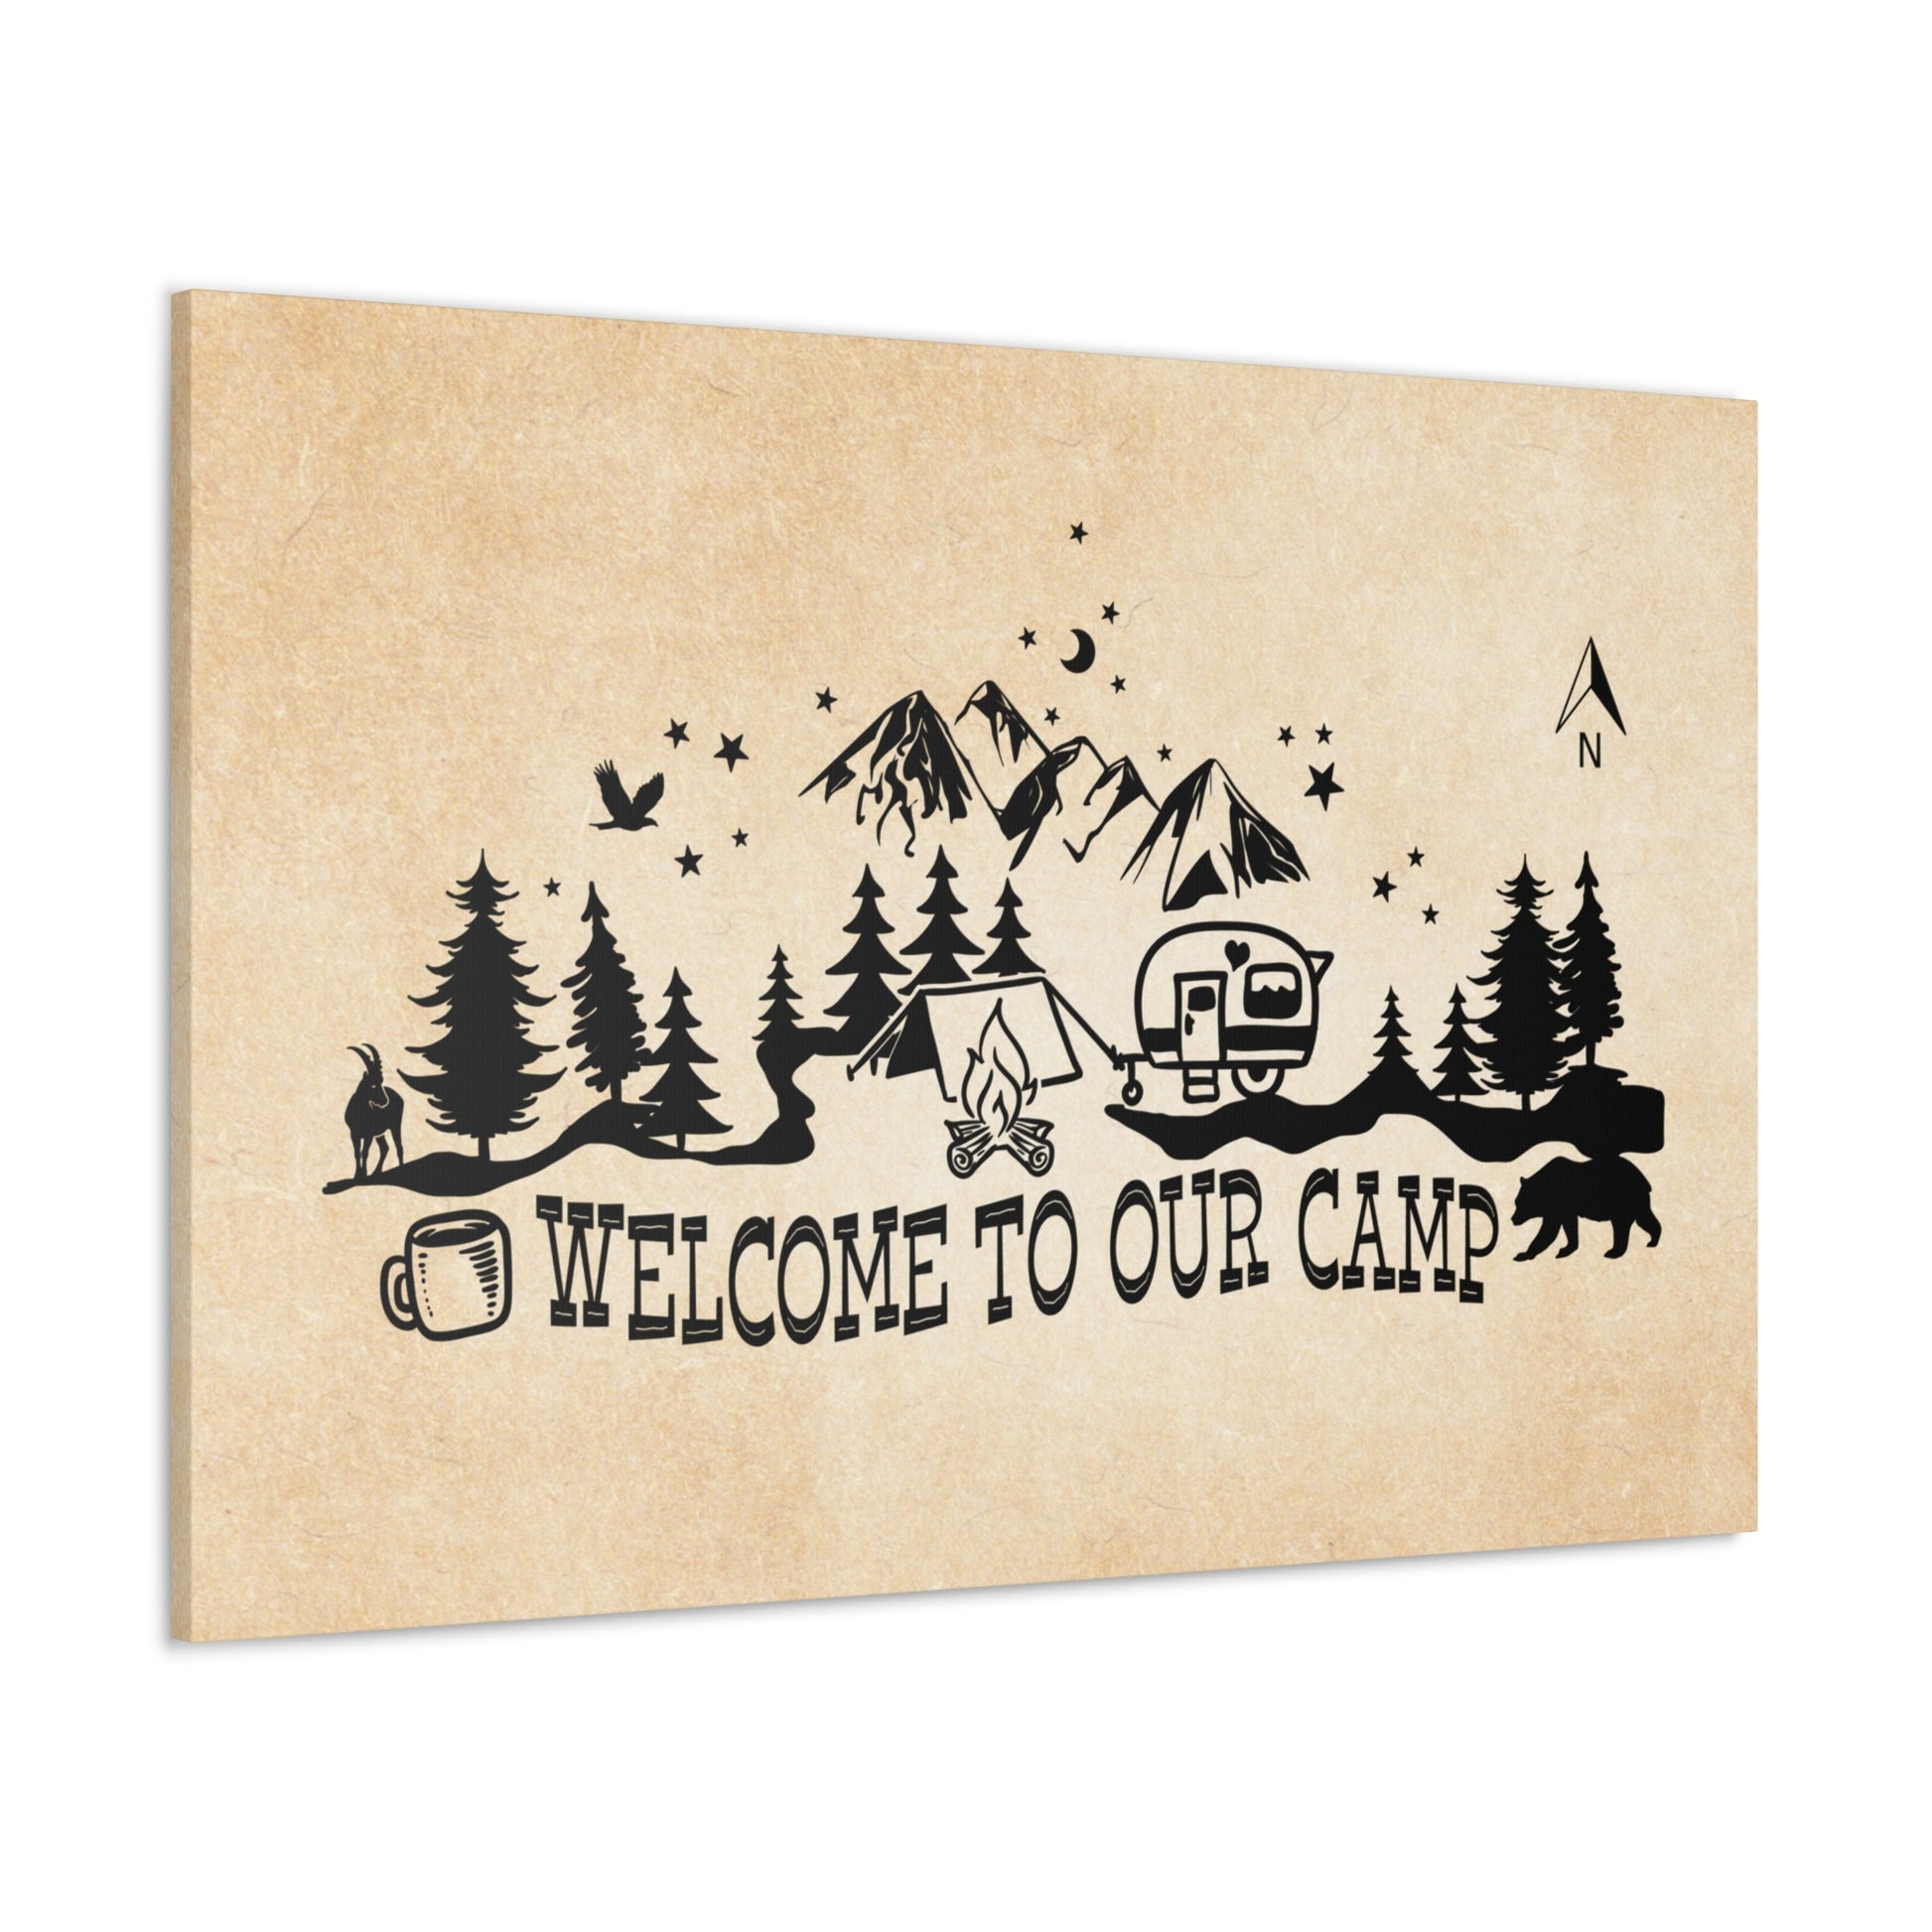 "Welcome To Our Camp" Wall Art - Weave Got Gifts - Unique Gifts You Won’t Find Anywhere Else!